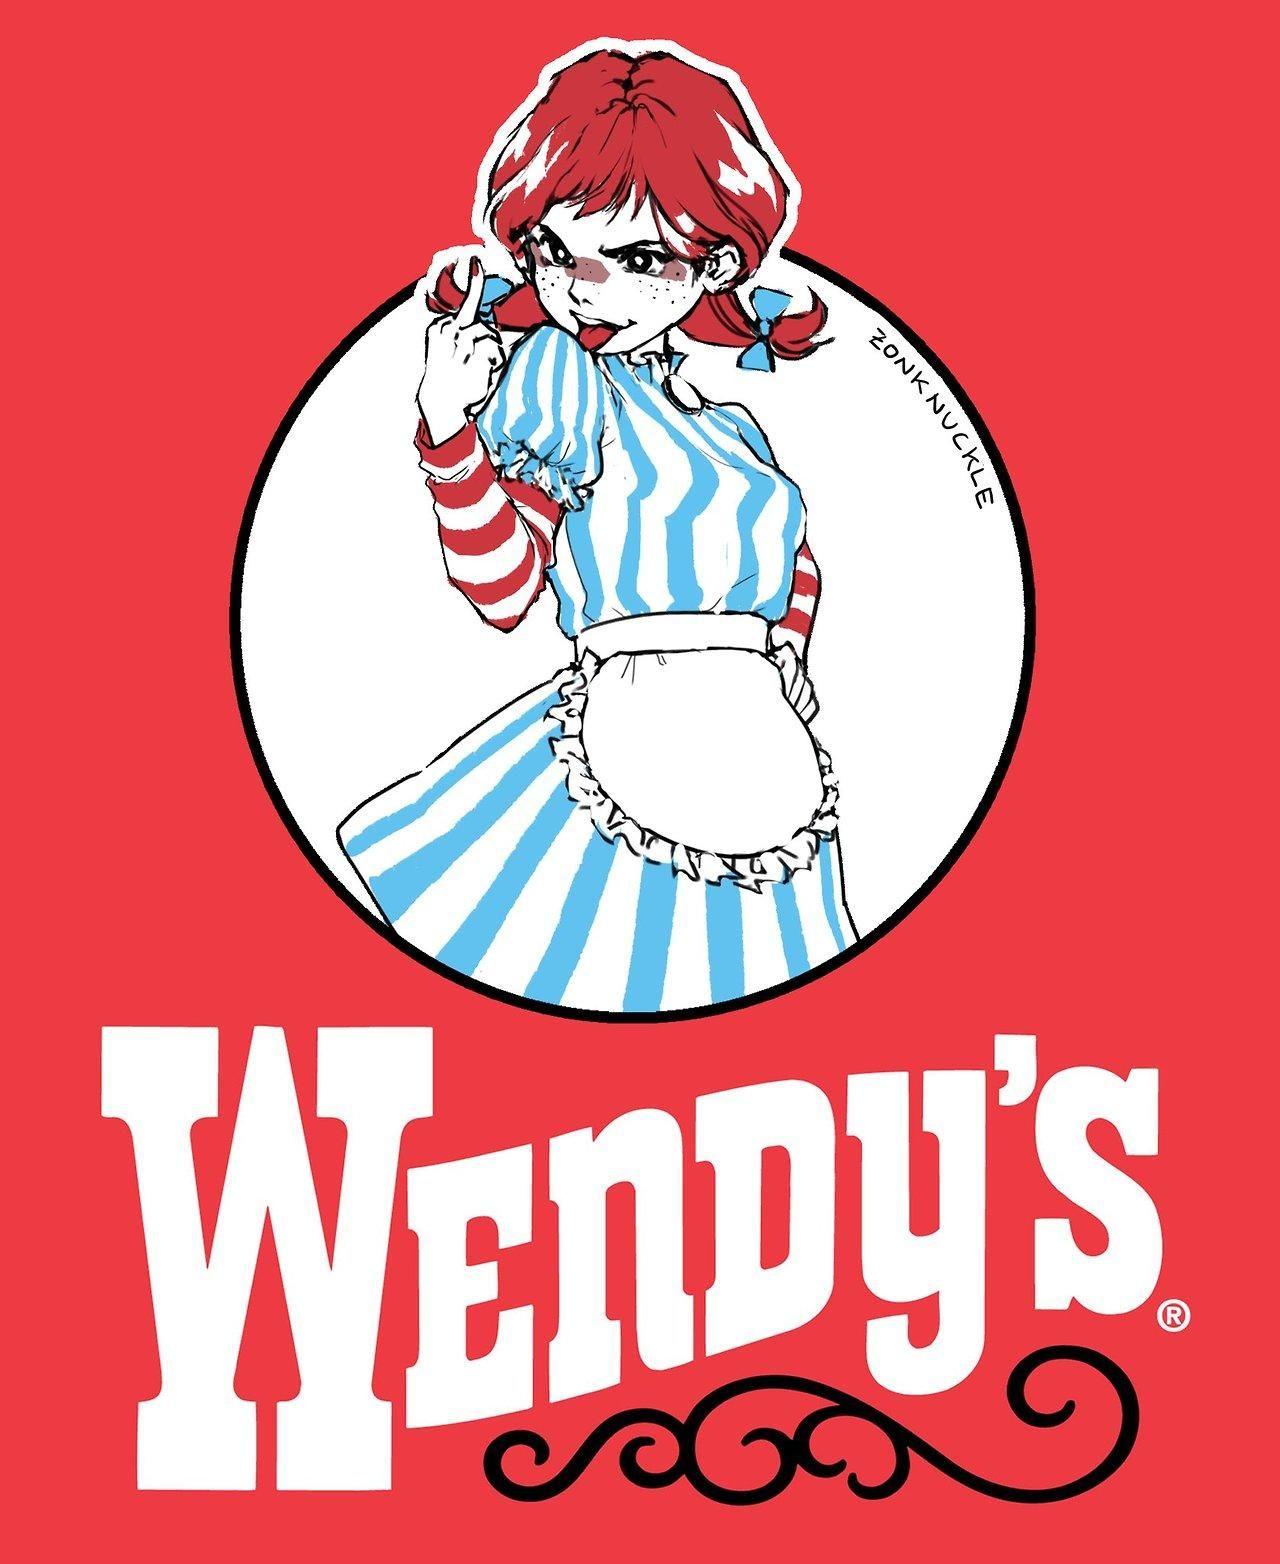 Wendy's Logo - Smug Wendy's logo by Zonk Nuckle | Wendy's meme | Memes, Funny ...